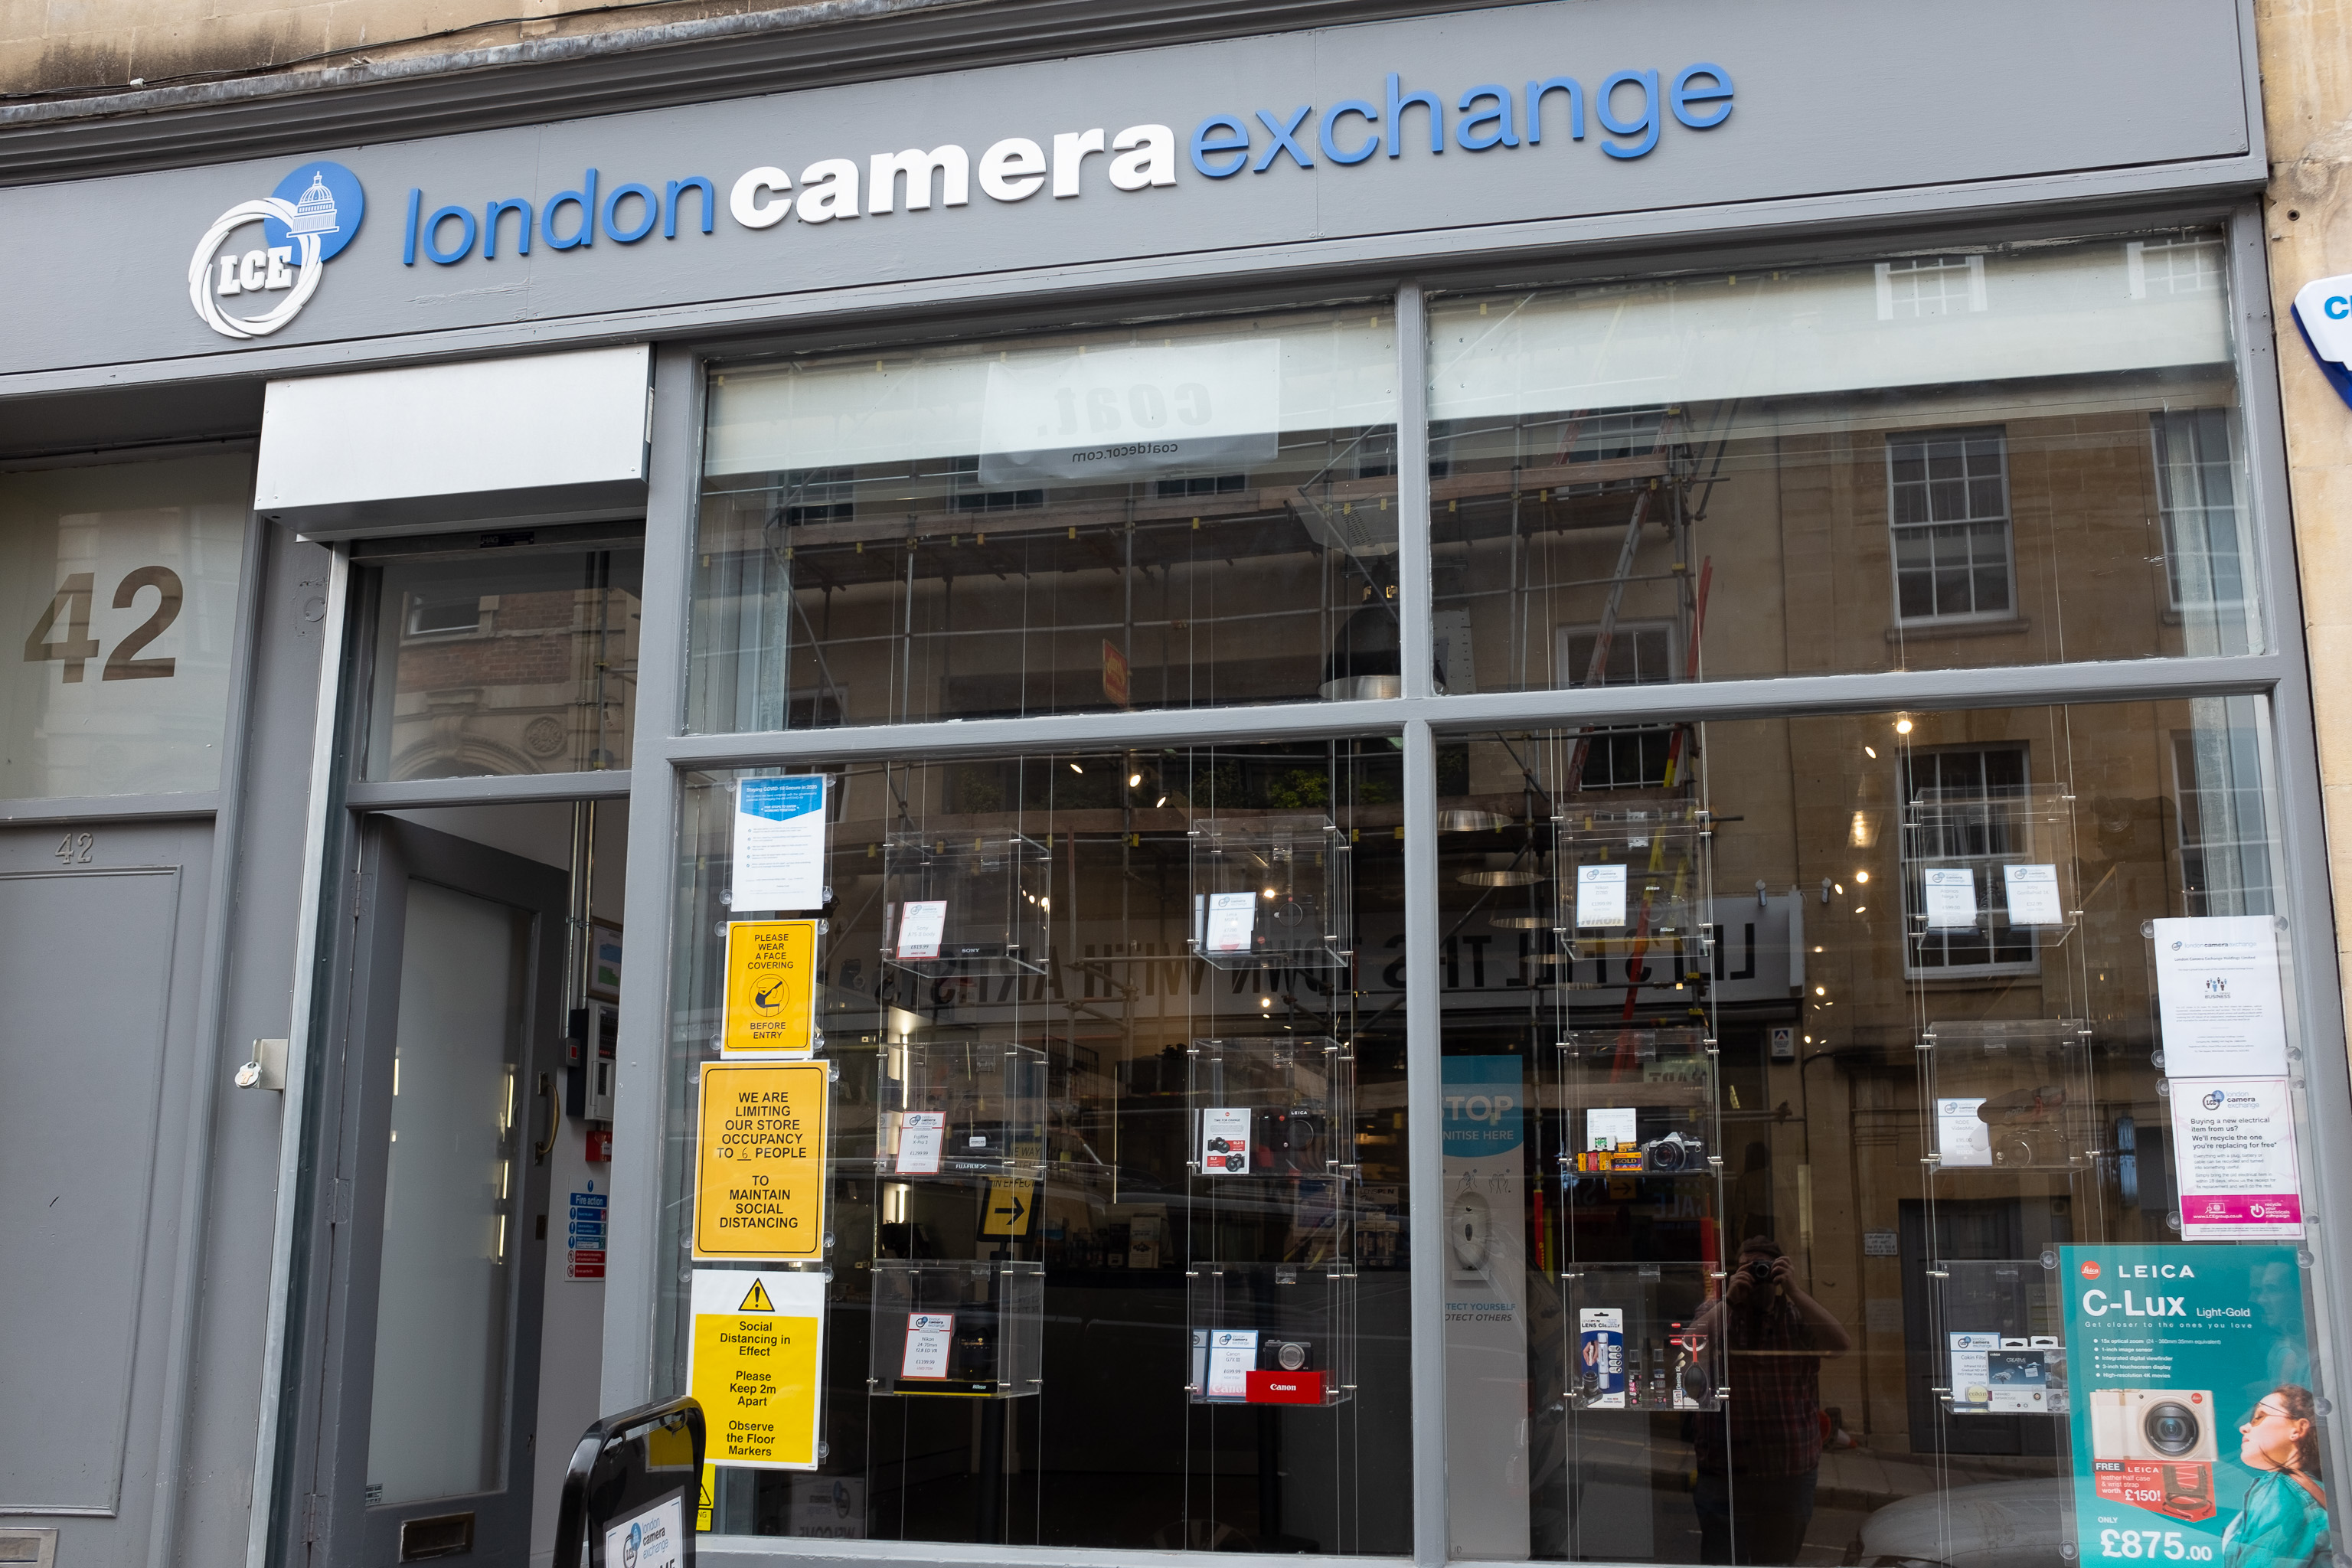 London Camera Exchange
I had no idea that both branches of London Camera Exchange (I always favoured the tiny shop at the end of Baldwin Street, but they also had one on...